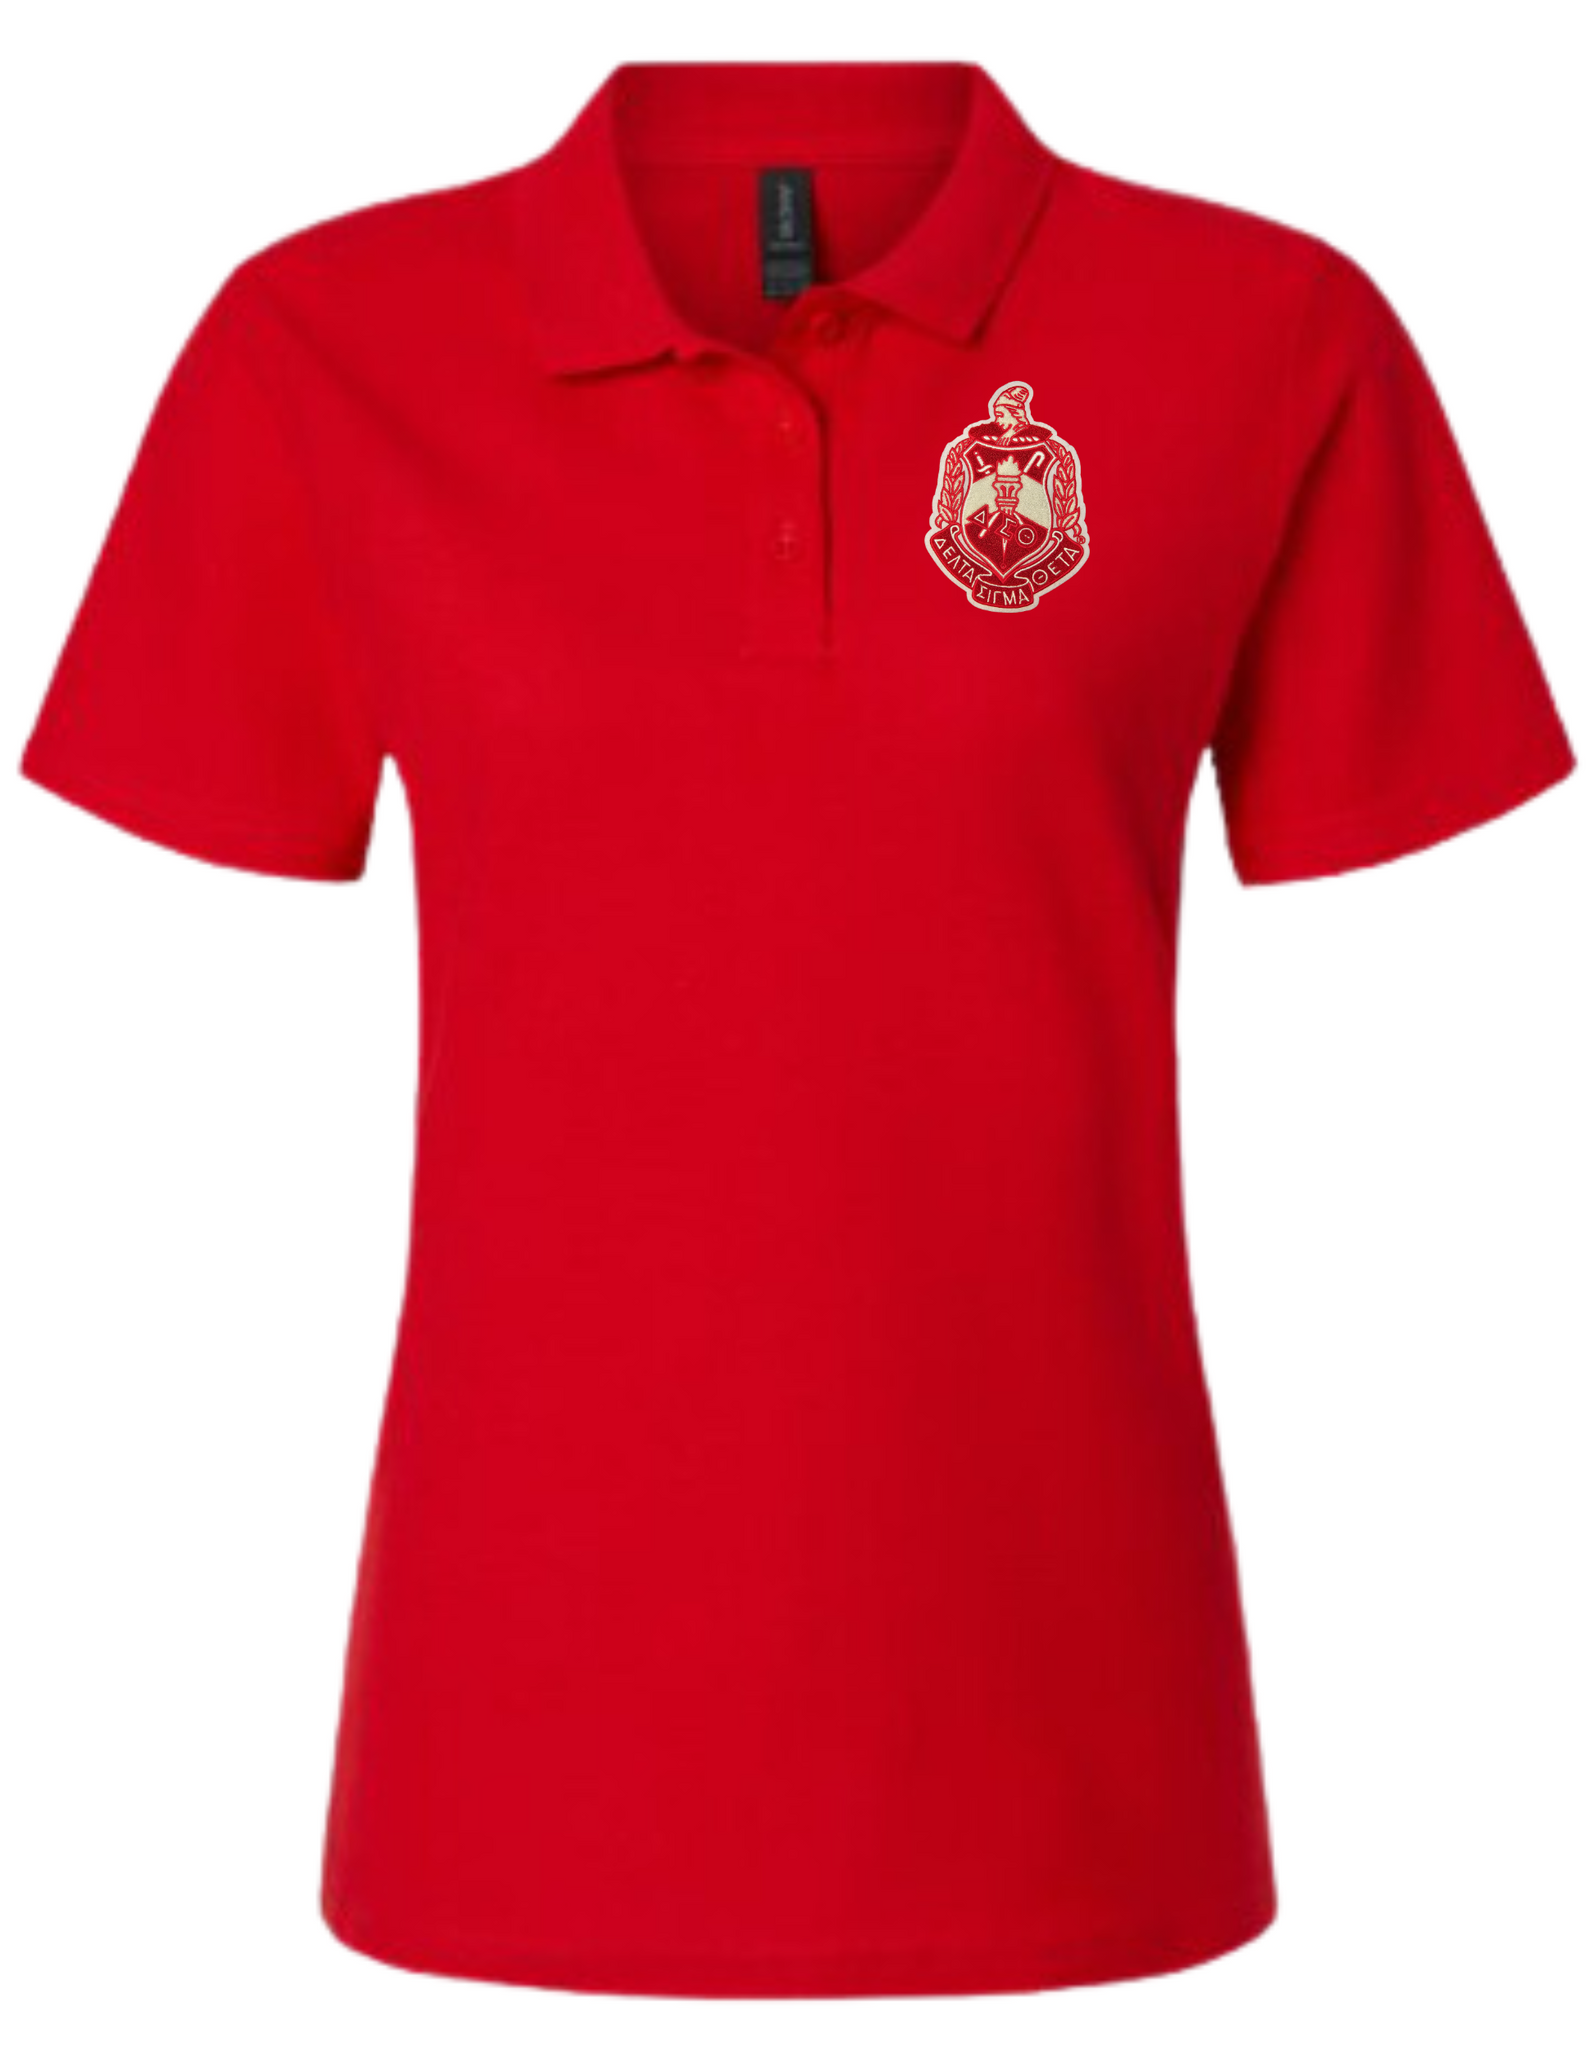 Delta Sigma Theta Ladies Fit Standard Polo w/ Embroidered Crest